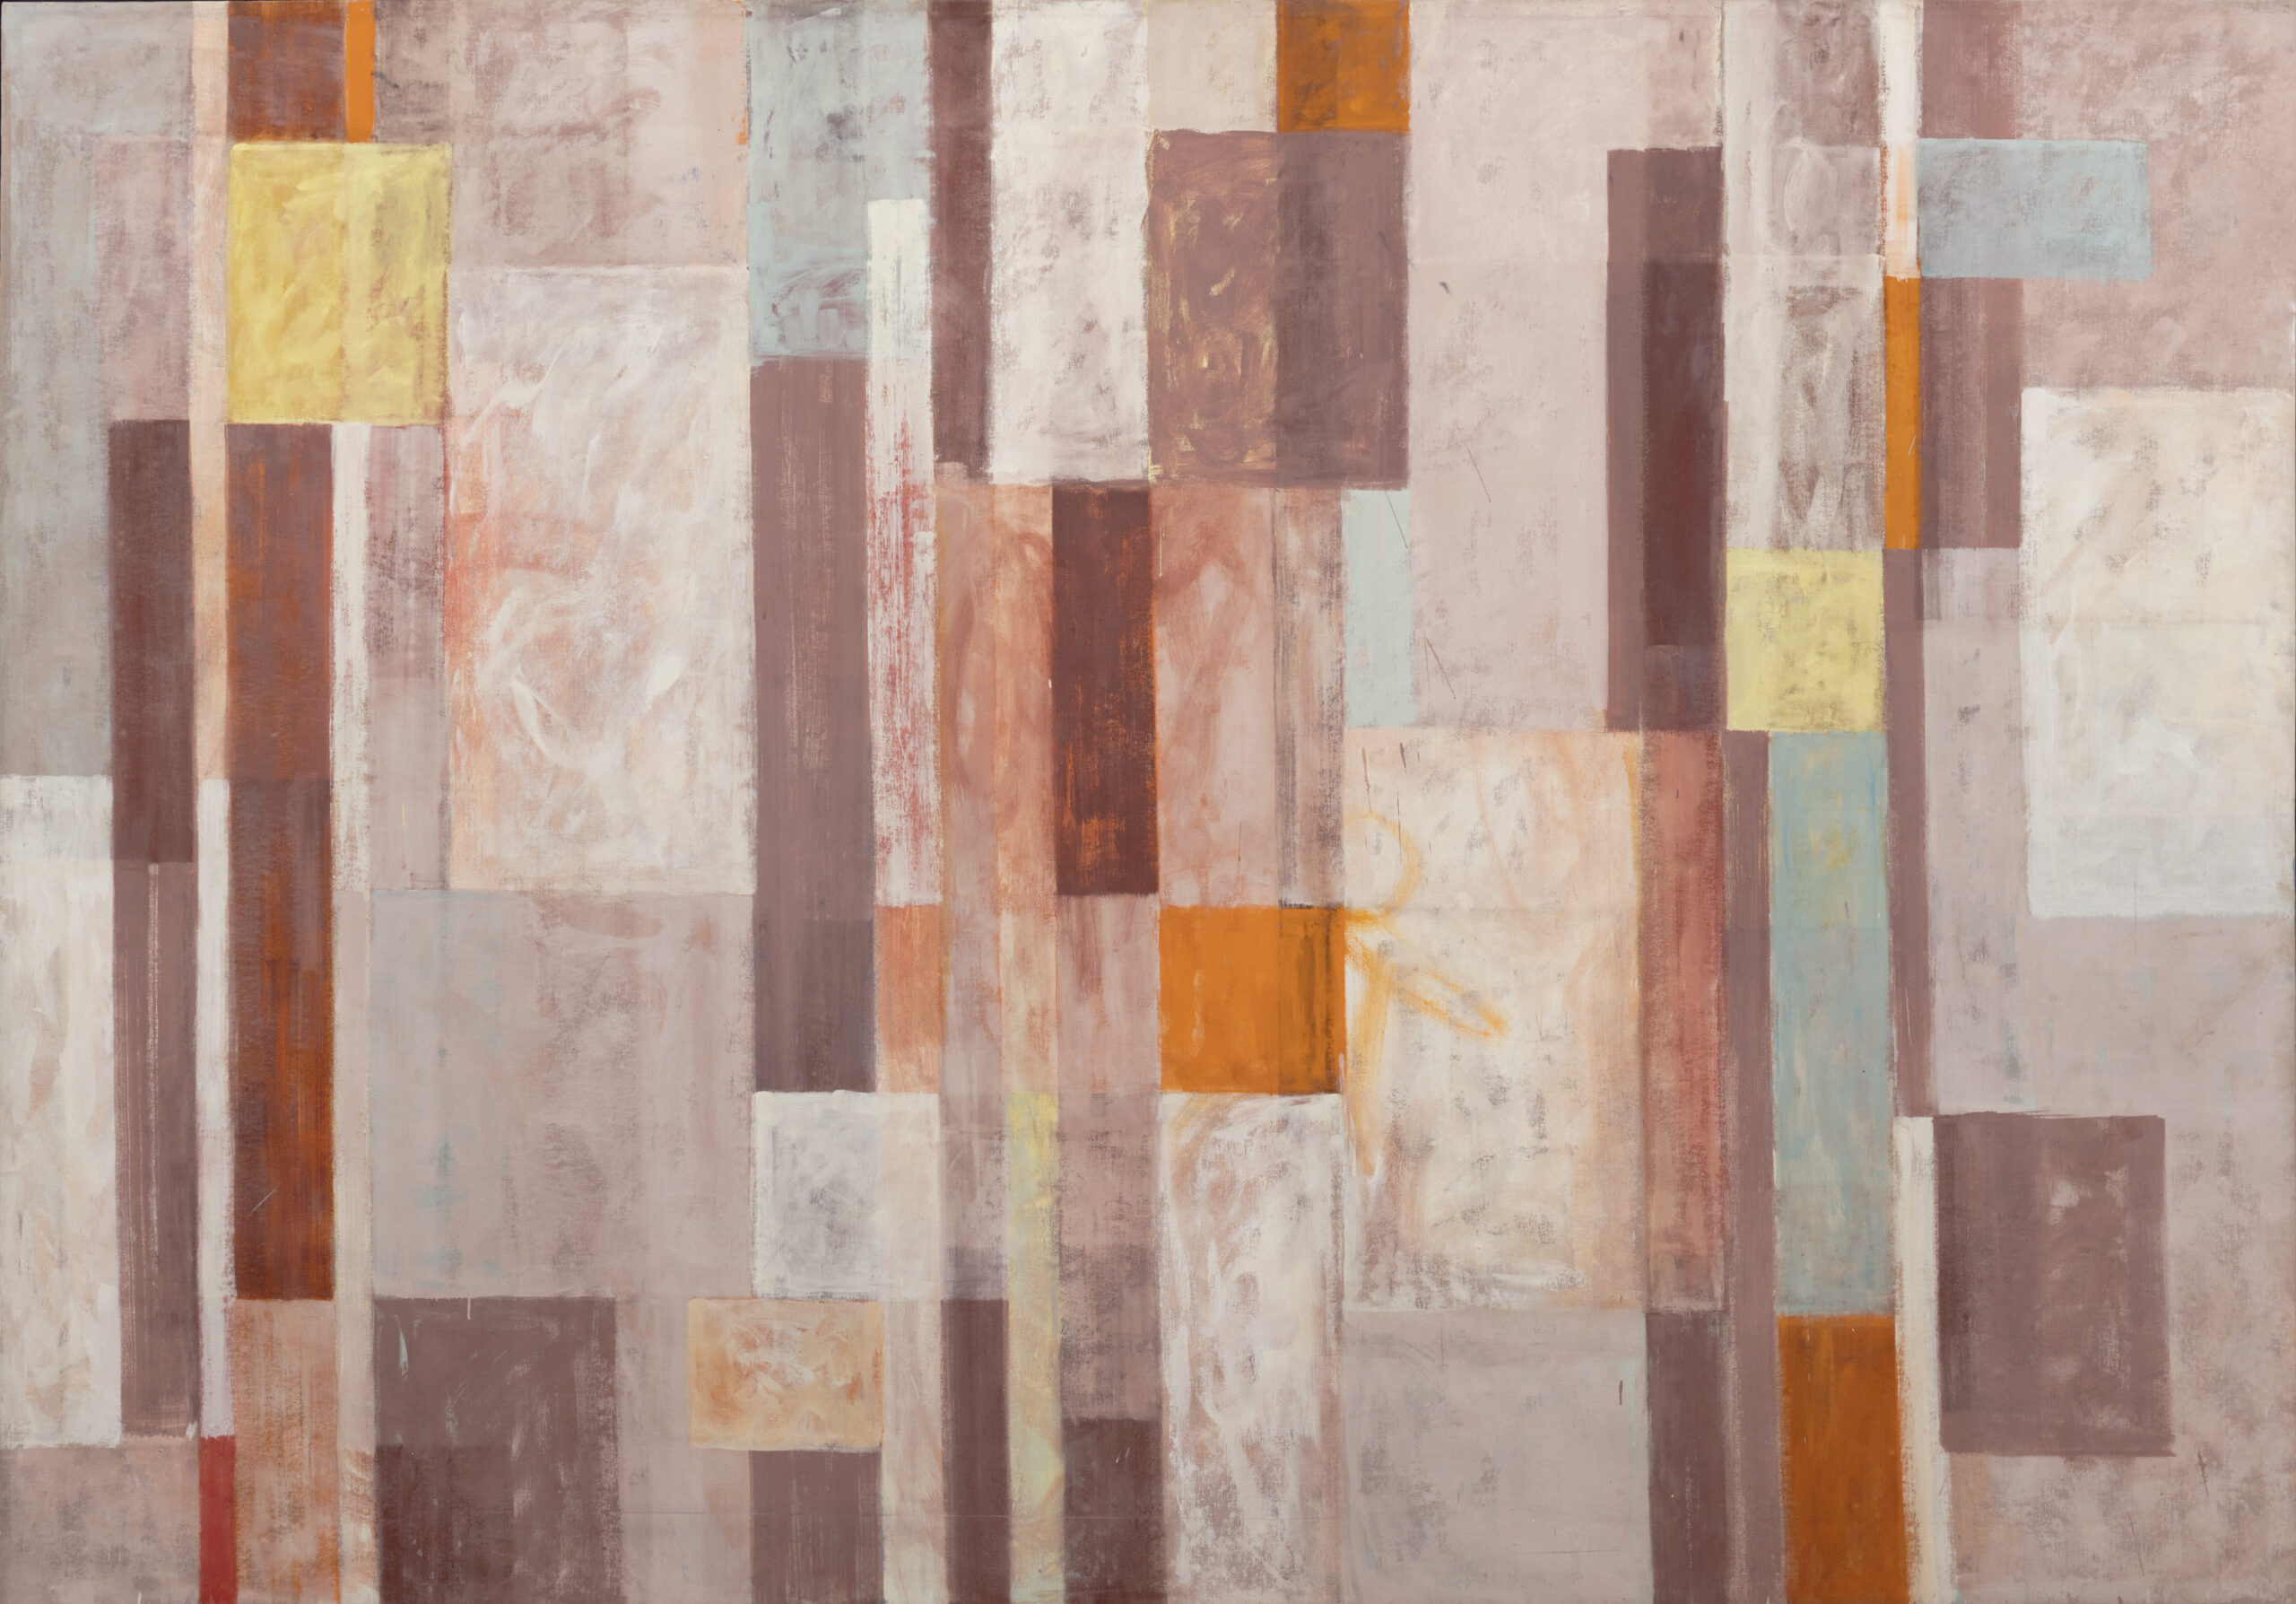 New York | After-Hours Gallery Tour of Lee Krasner Exhibition at Kasmin